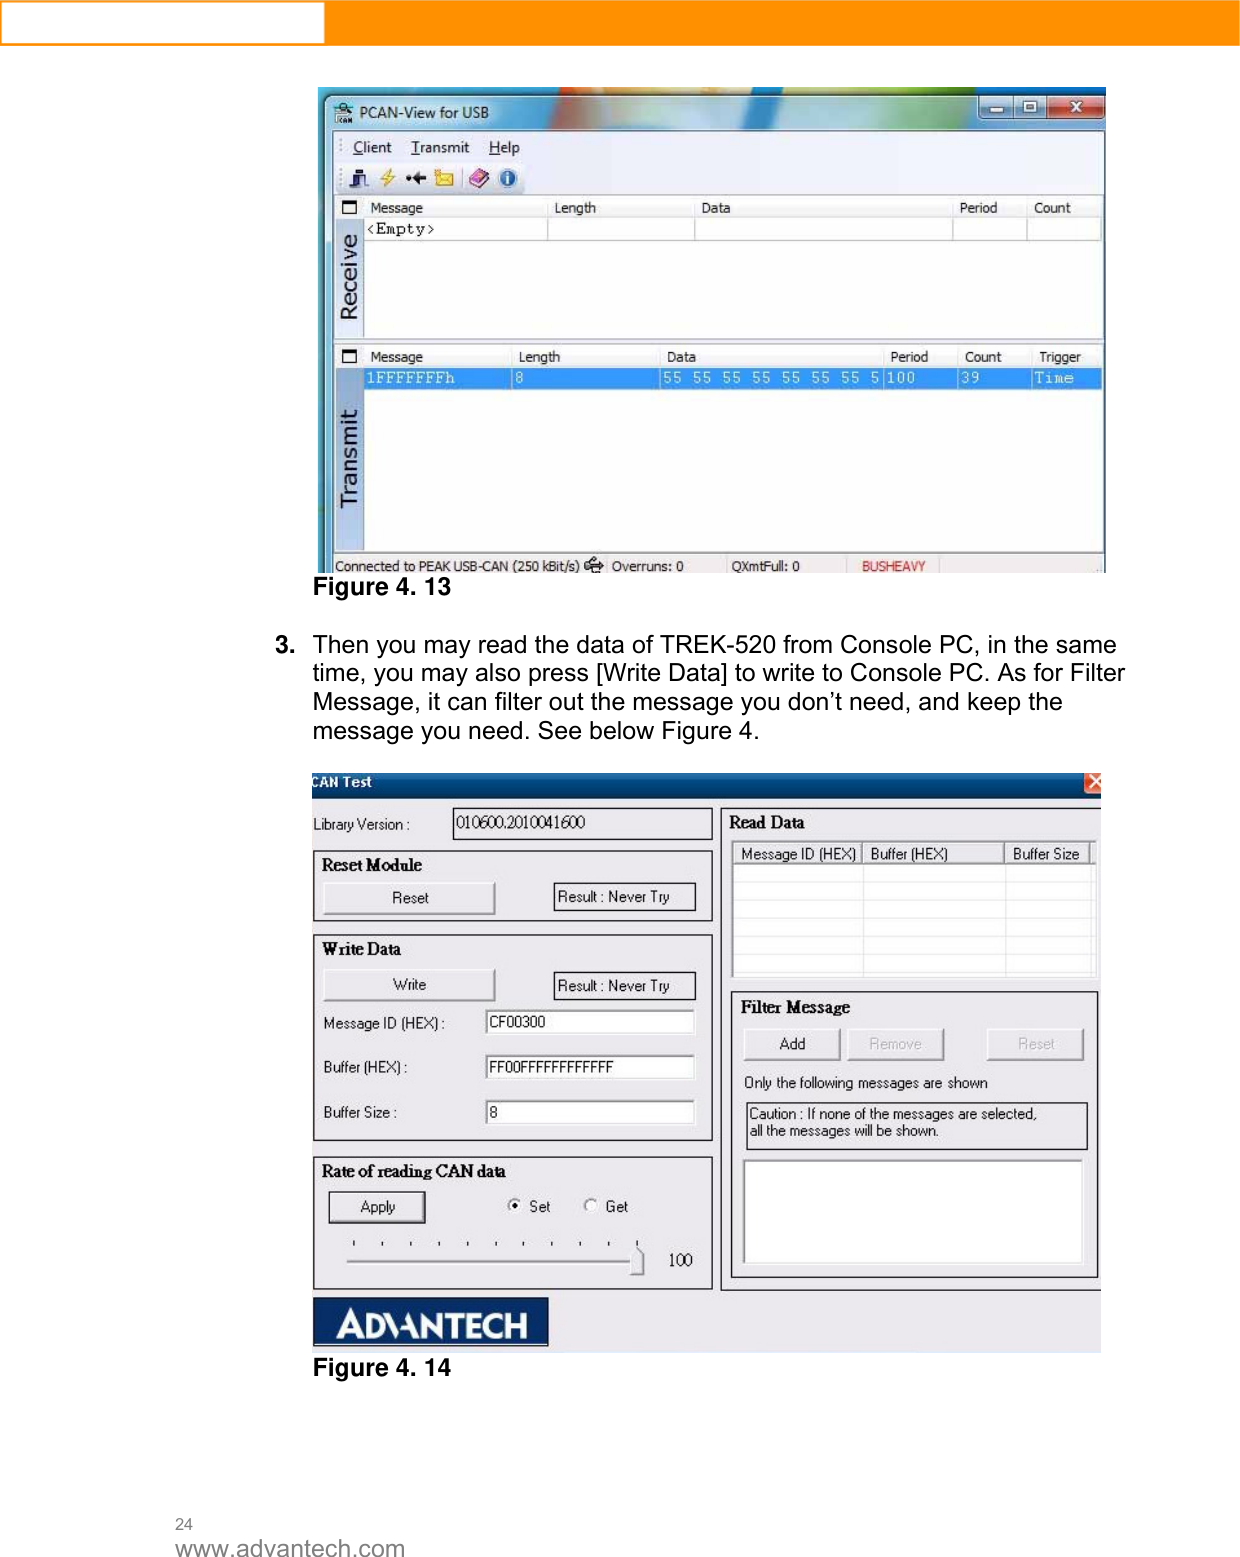  24 www.advantech.com   Figure 4. 13  3.  Then you may read the data of TREK-520 from Console PC, in the same time, you may also press [Write Data] to write to Console PC. As for Filter Message, it can filter out the message you don’t need, and keep the message you need. See below Figure 4.     Figure 4. 14     